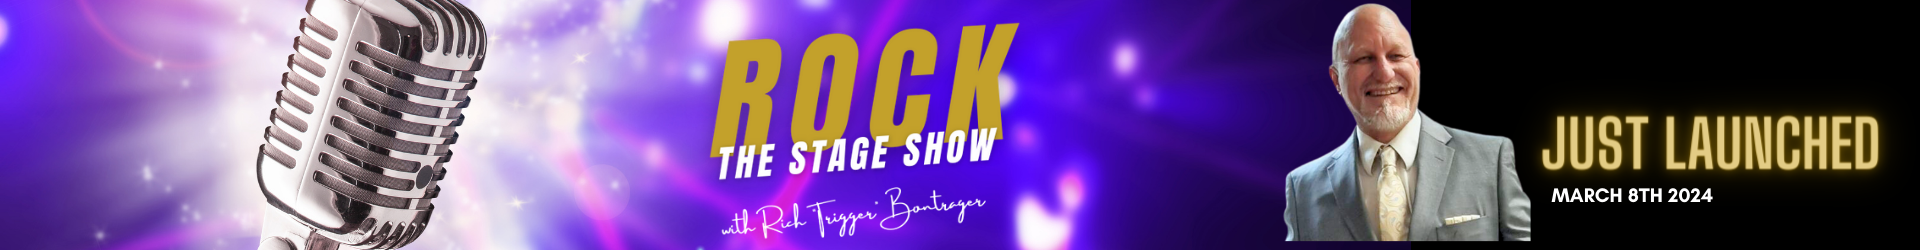 Just Launched Rock the Stage Show